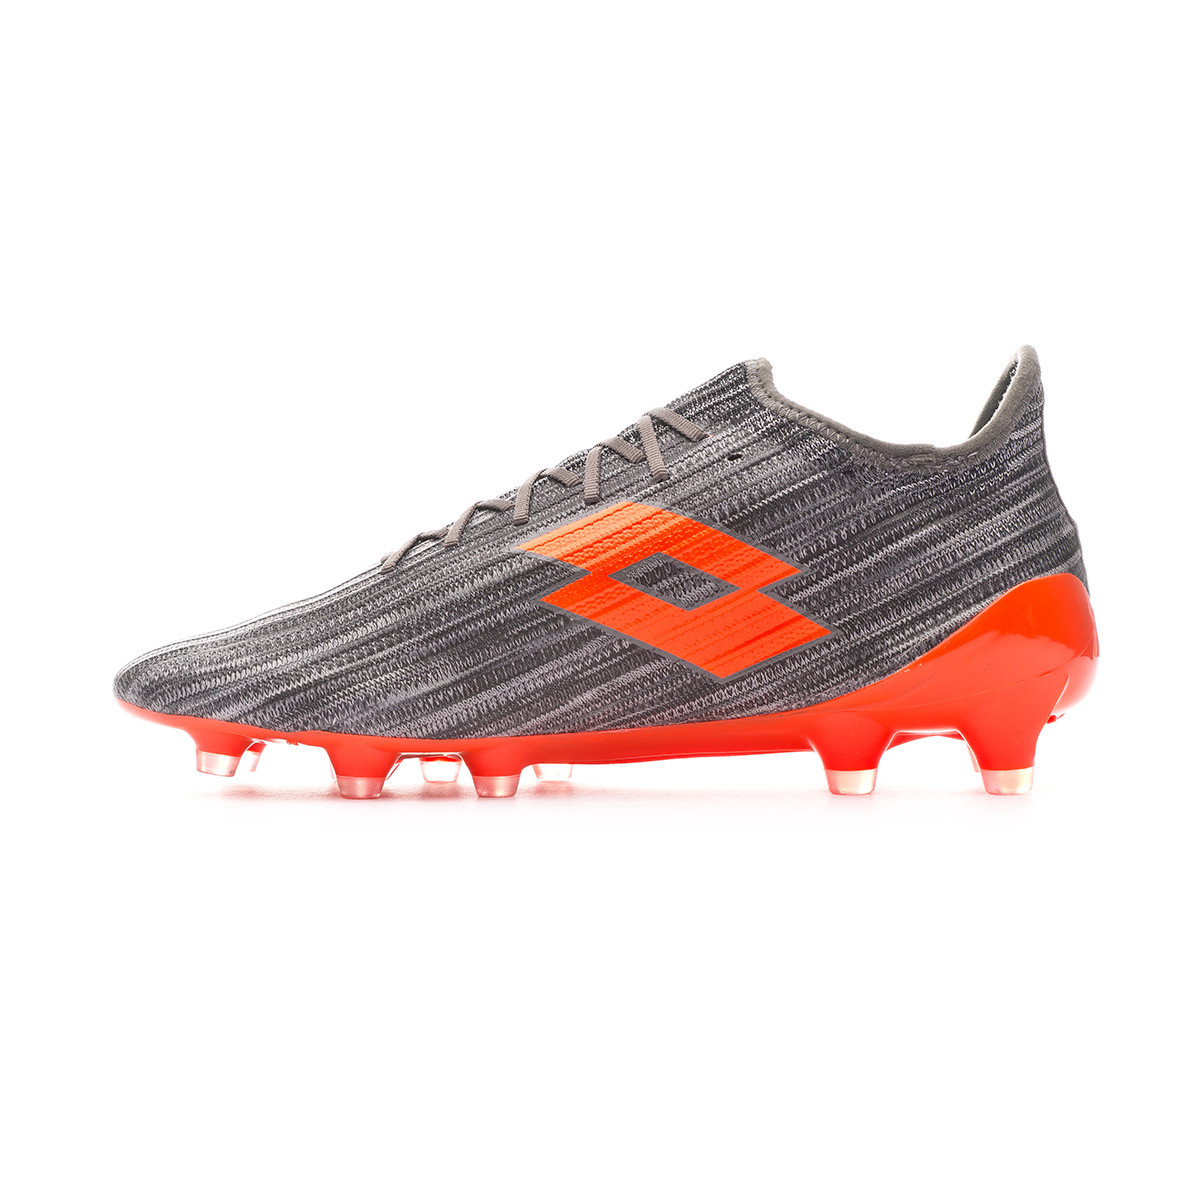 cool football shoes